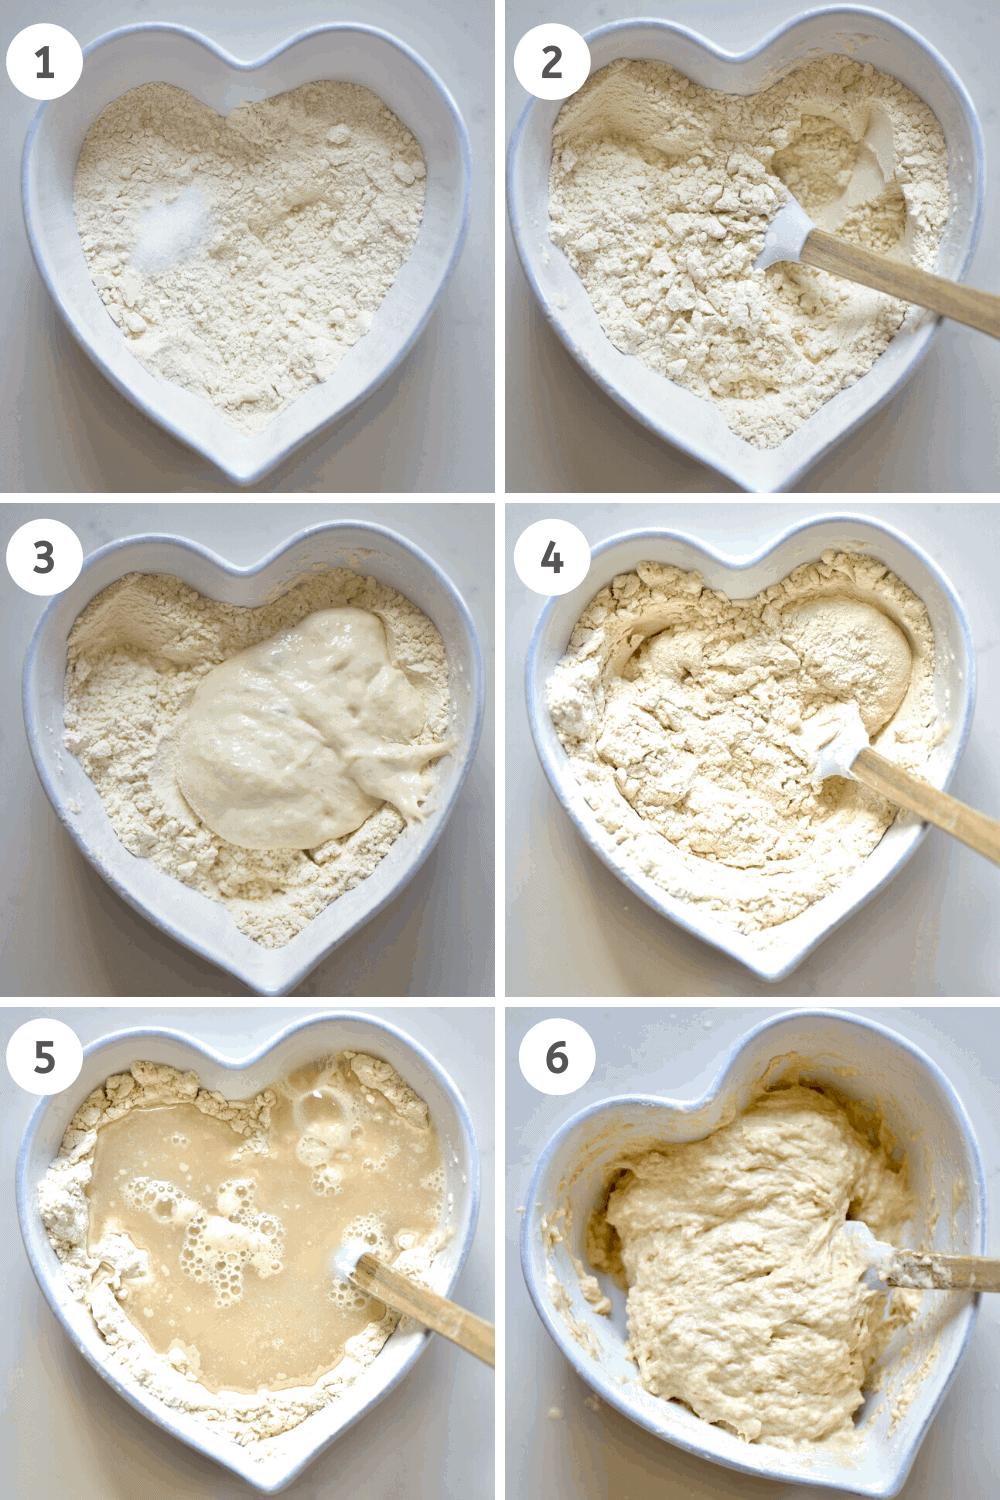 Mixing flour with yeast for pizza dough